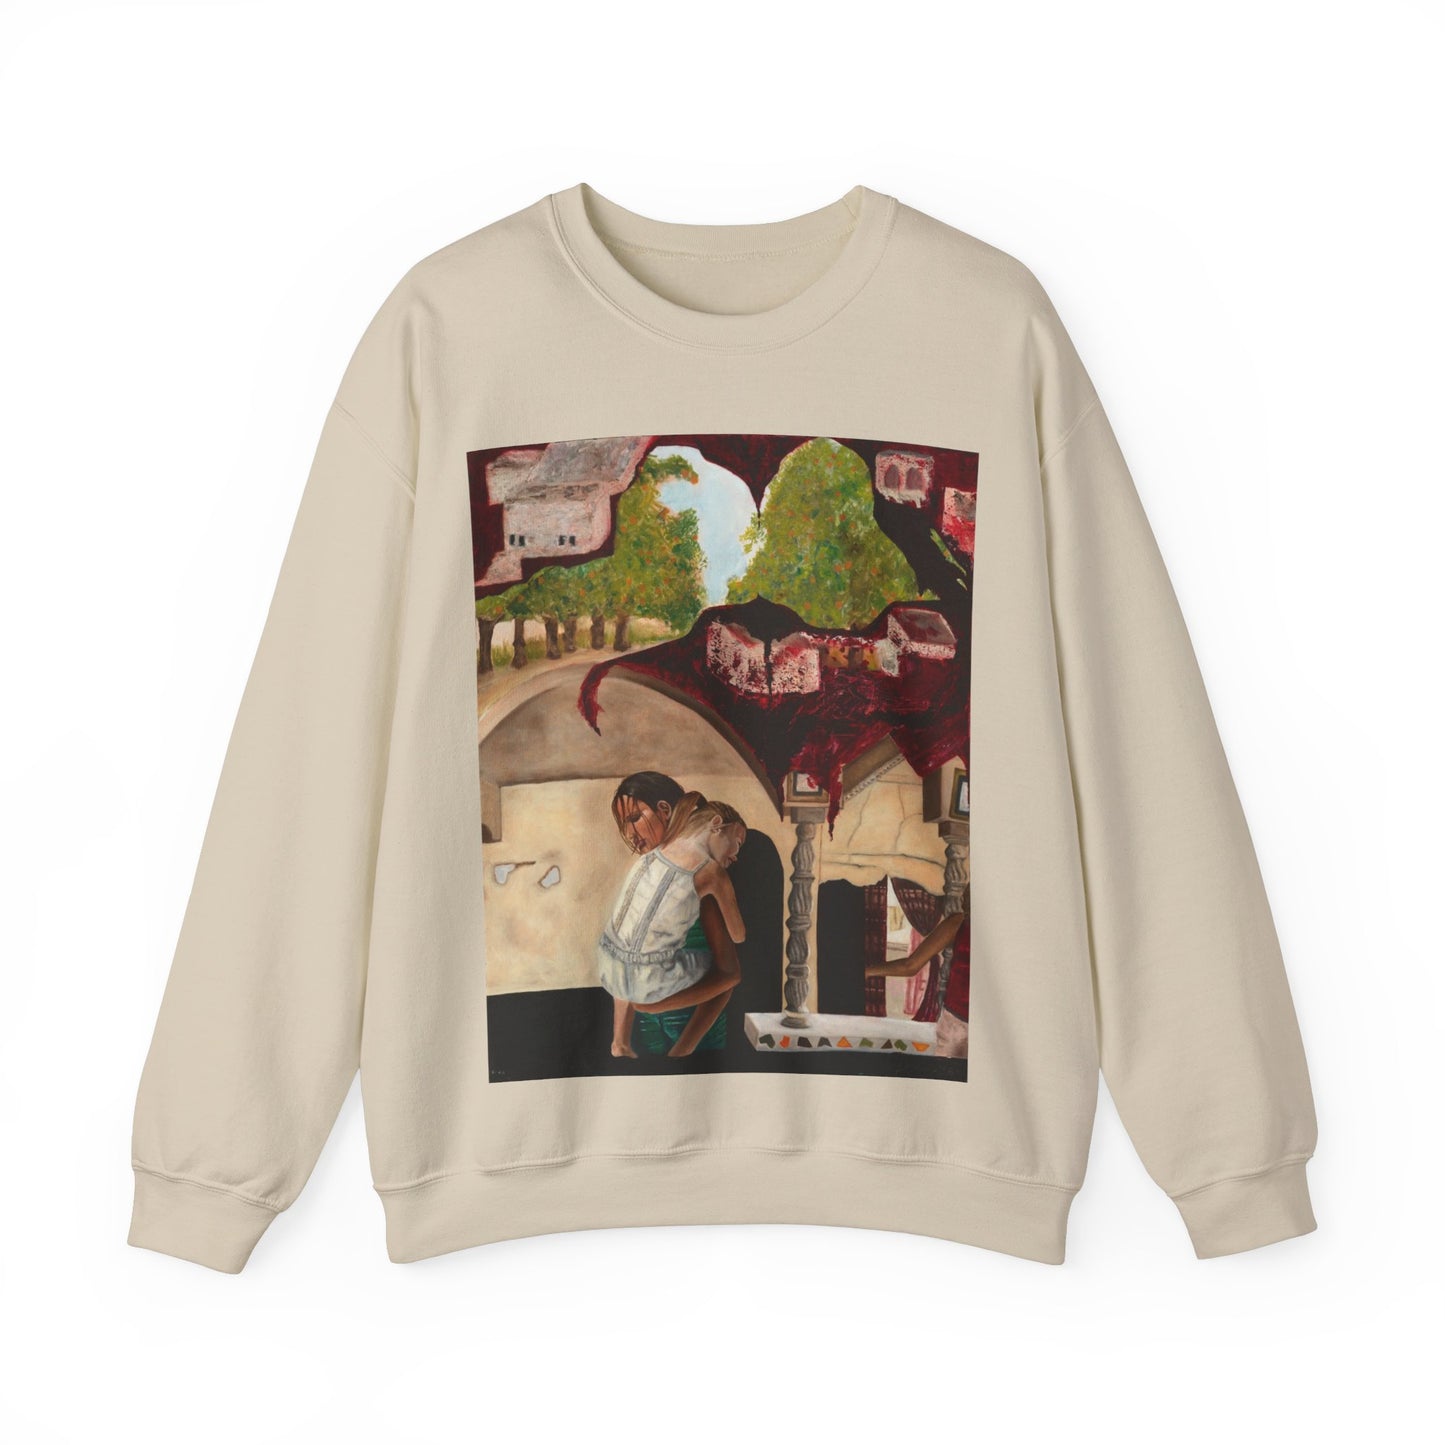 Crewneck Sweatshirt Printed with "Psyche of Lost Youth" - art under moonlight